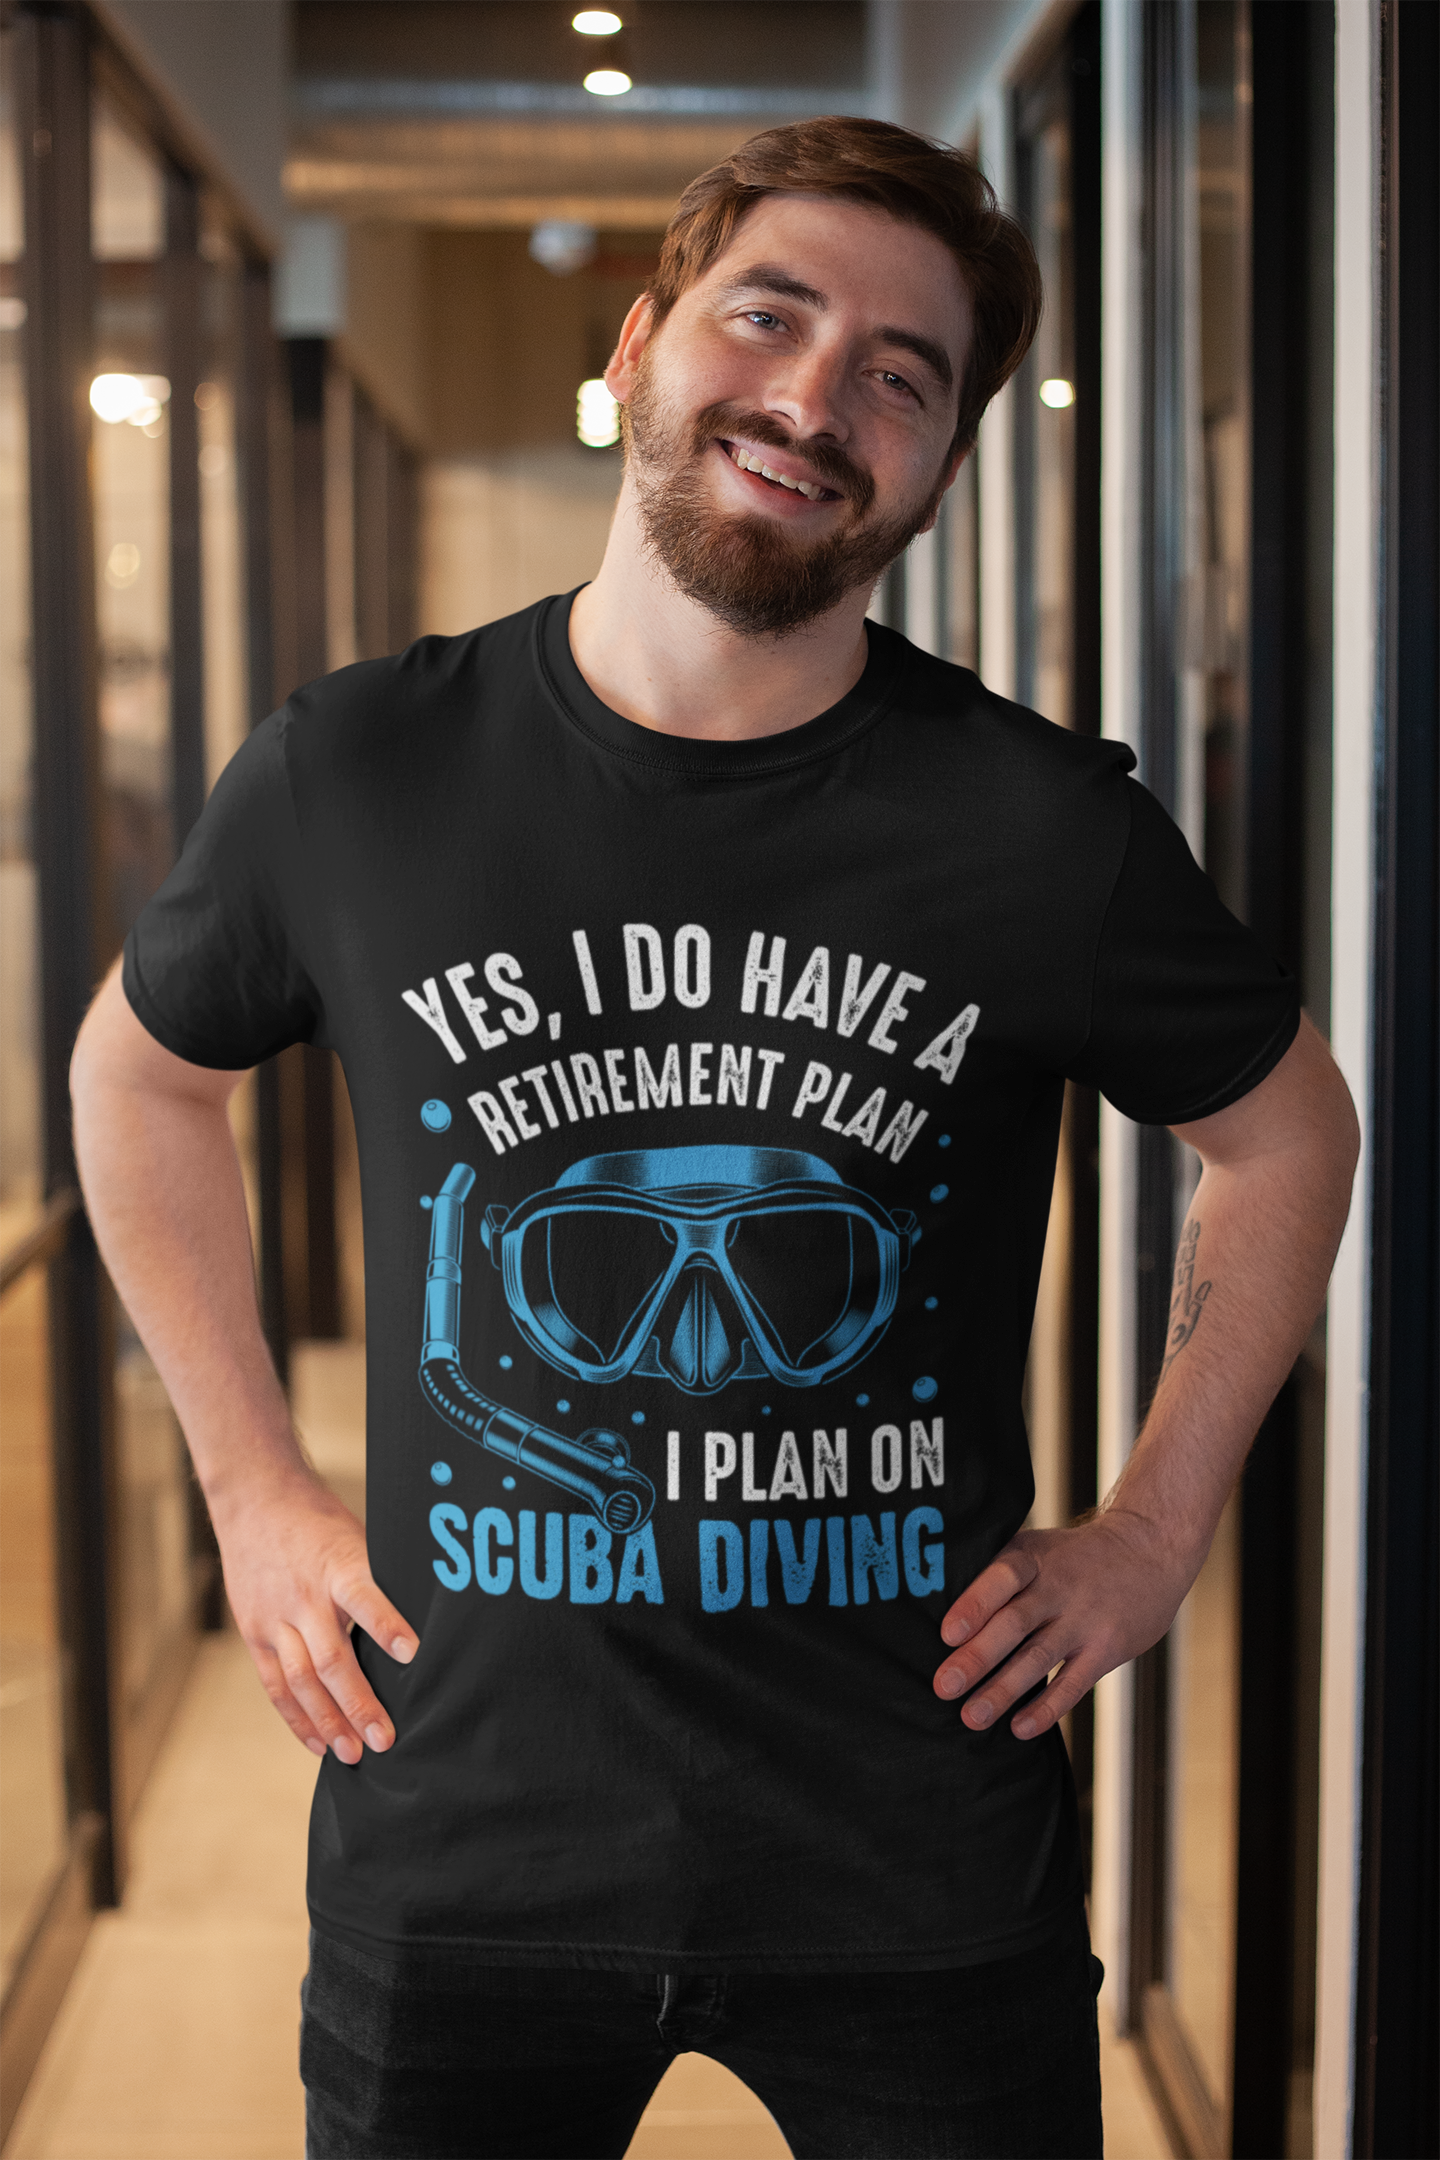 Yes I do have a retirement plan black t-shirt worn by a bearded man